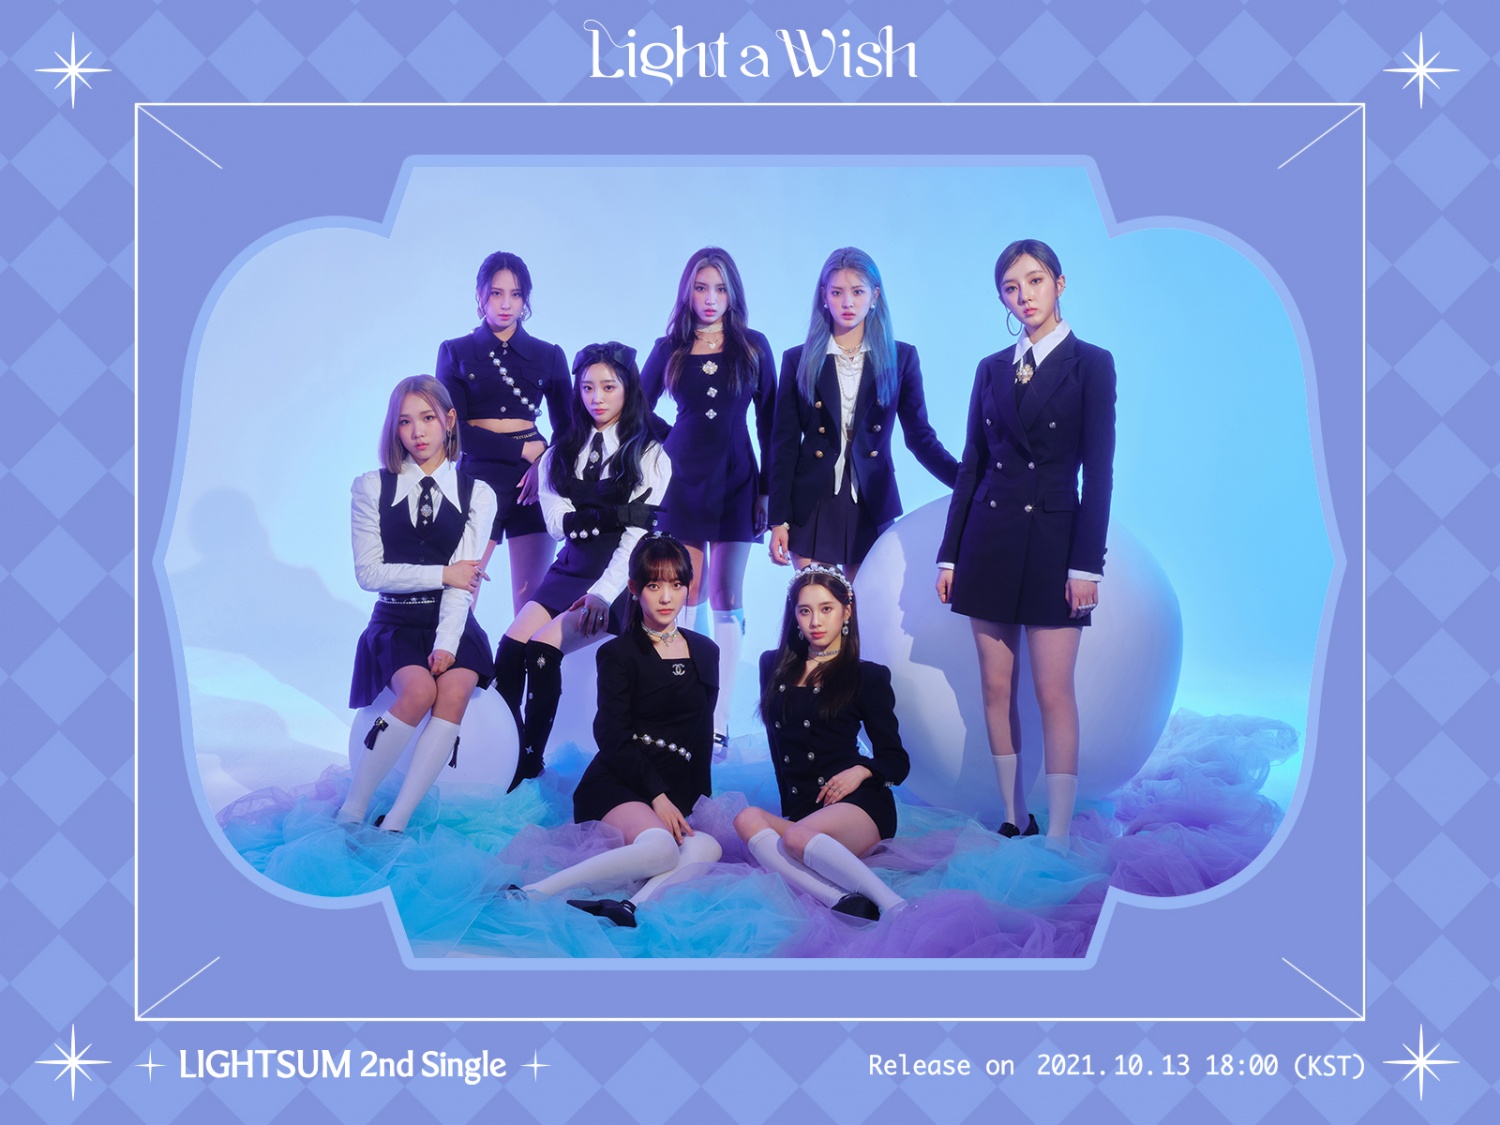 LIGHTSUM, 'Light a Wish' concept photo released